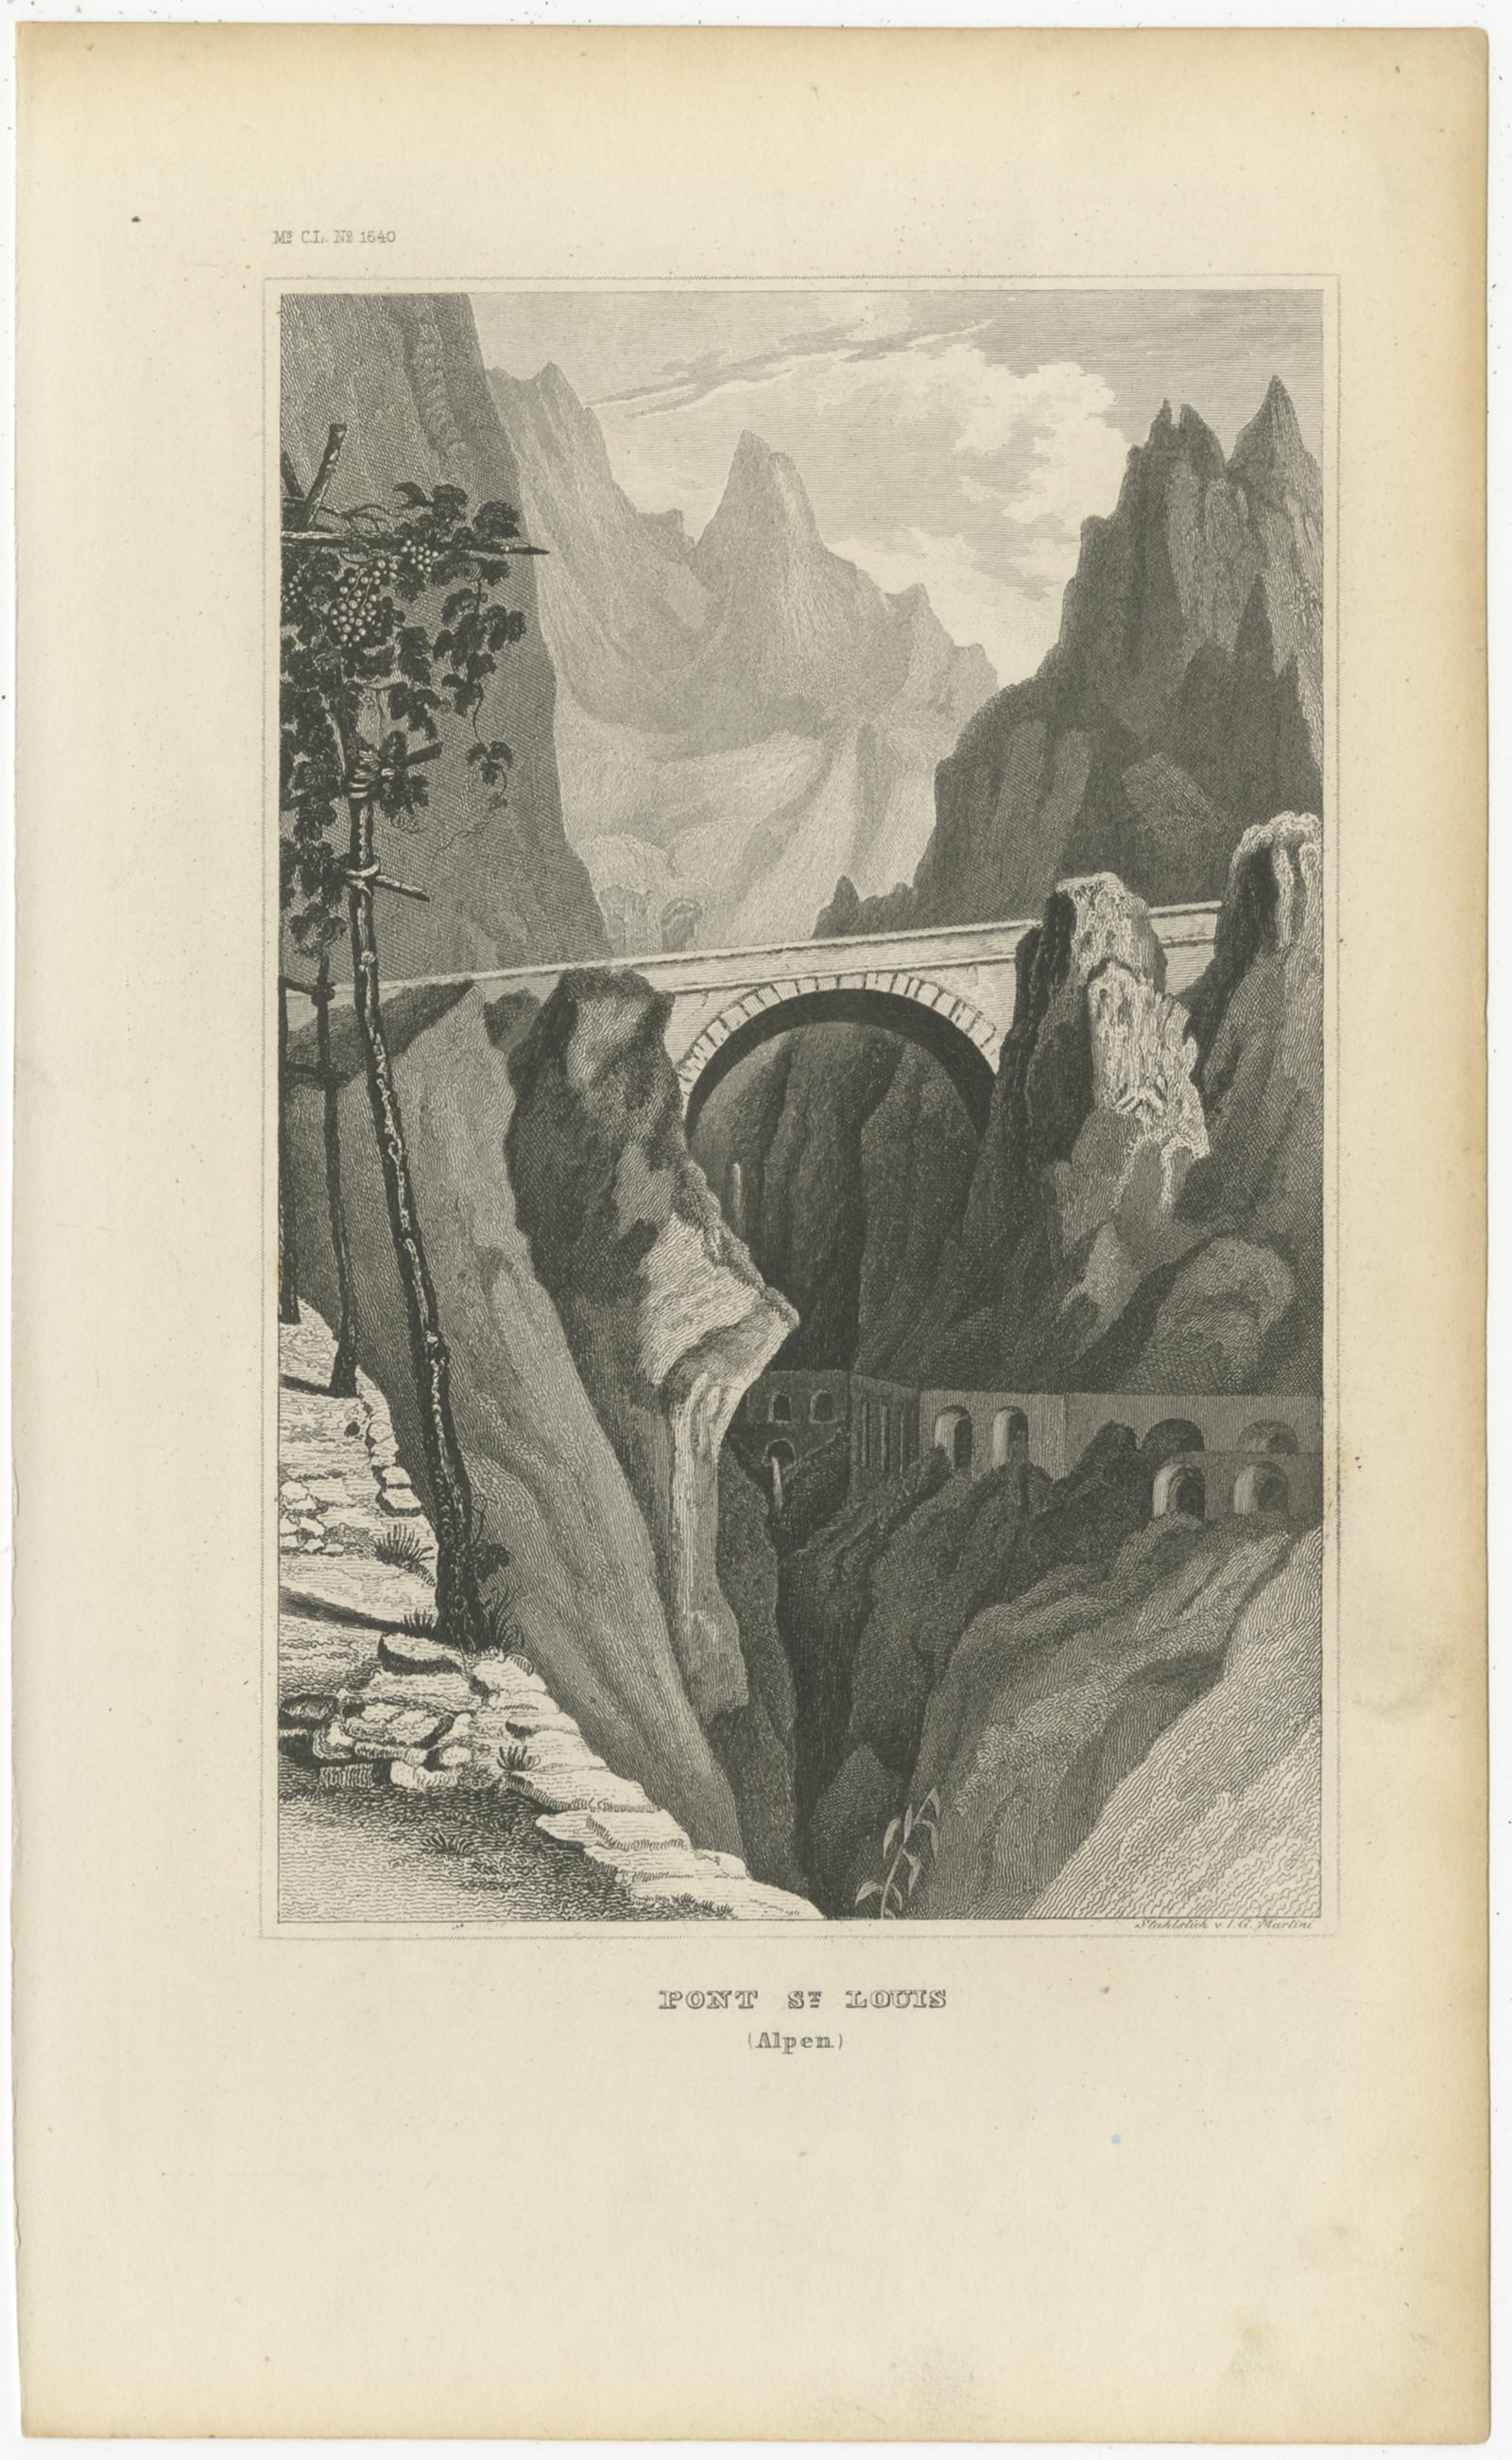 Antique print titled 'Pont St. Louis (Alpen)'. View of the Saint-Louis bridge, on the border between France and Italy in Menton, Alpes-Maritimes. Engraved by Martini, published circa 1840. Source unknown, to be determined.